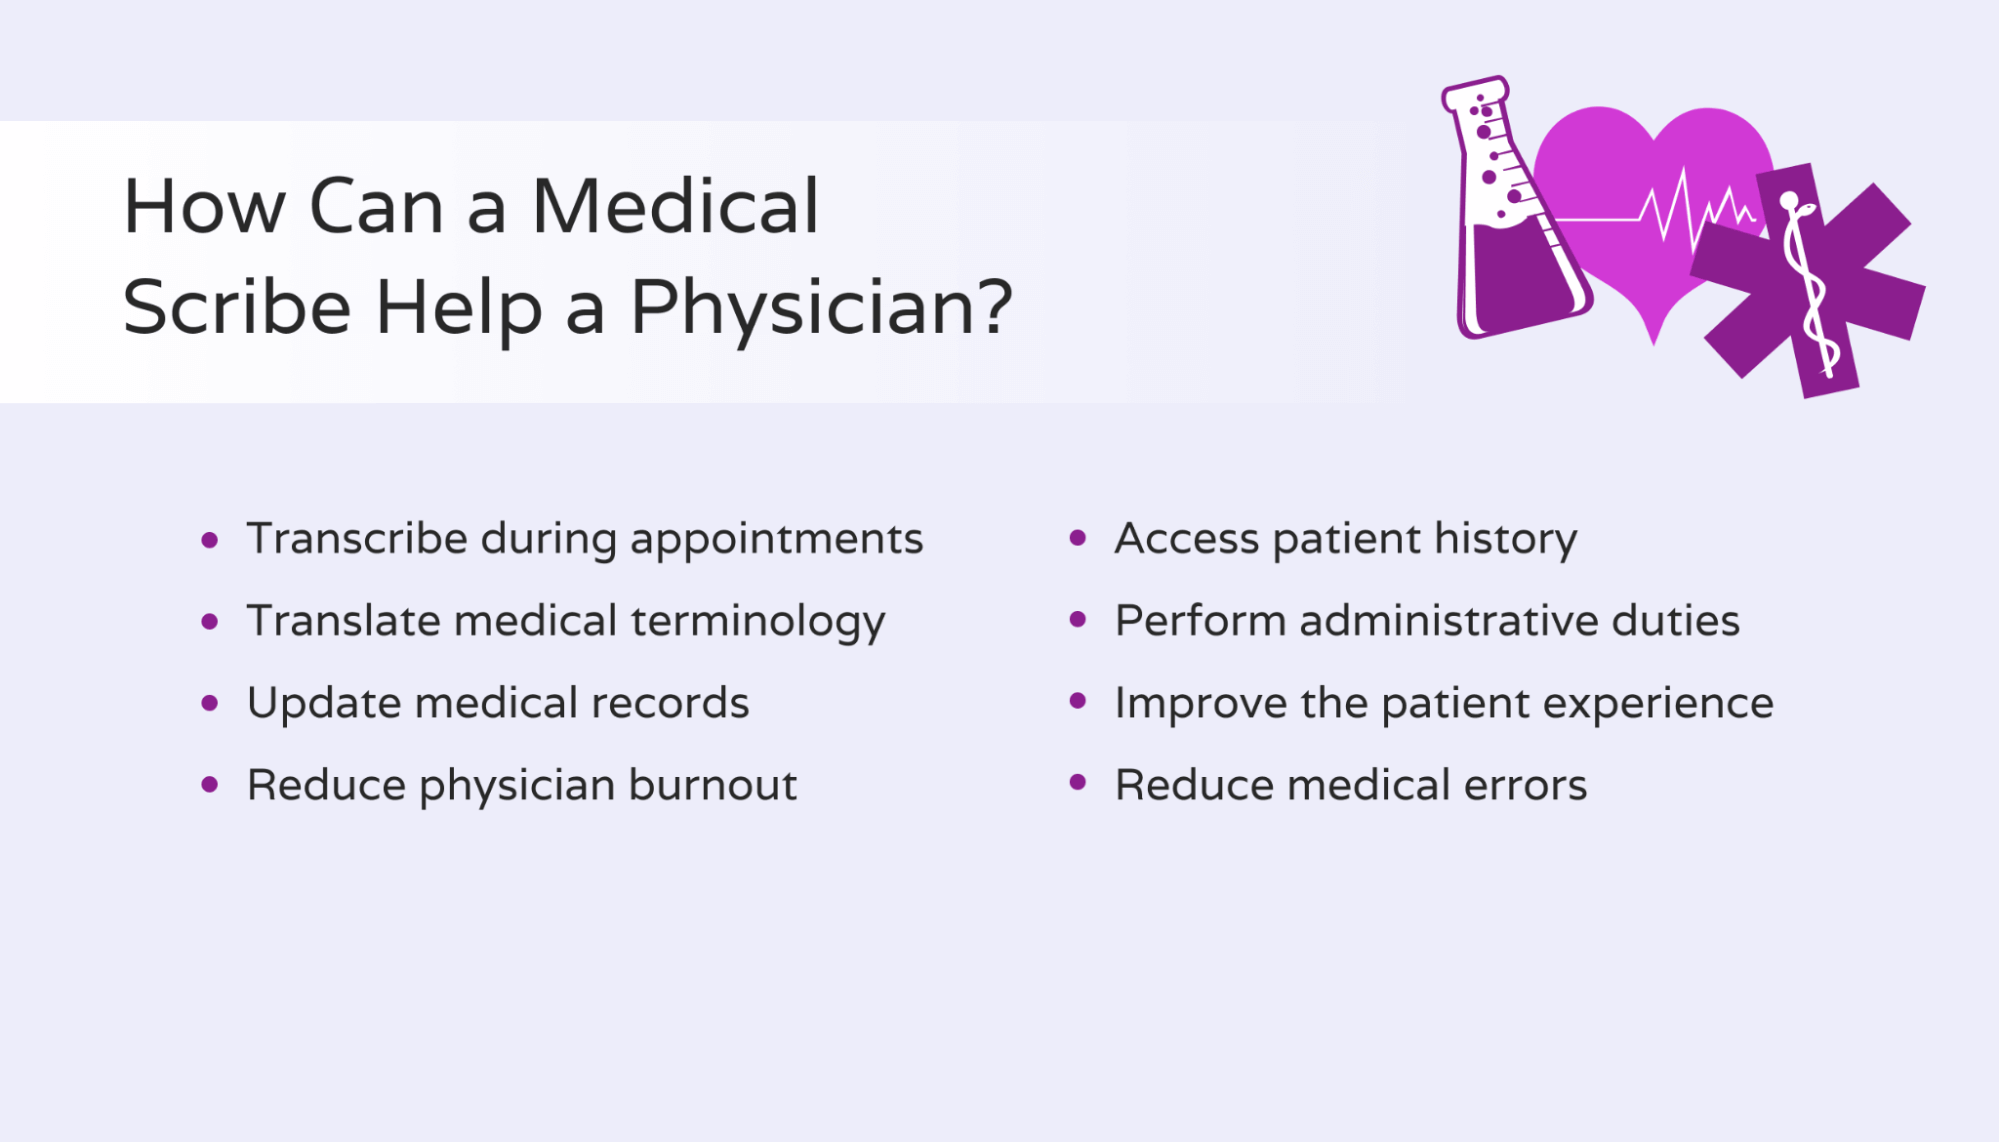 How can a medical scribe help a physician?